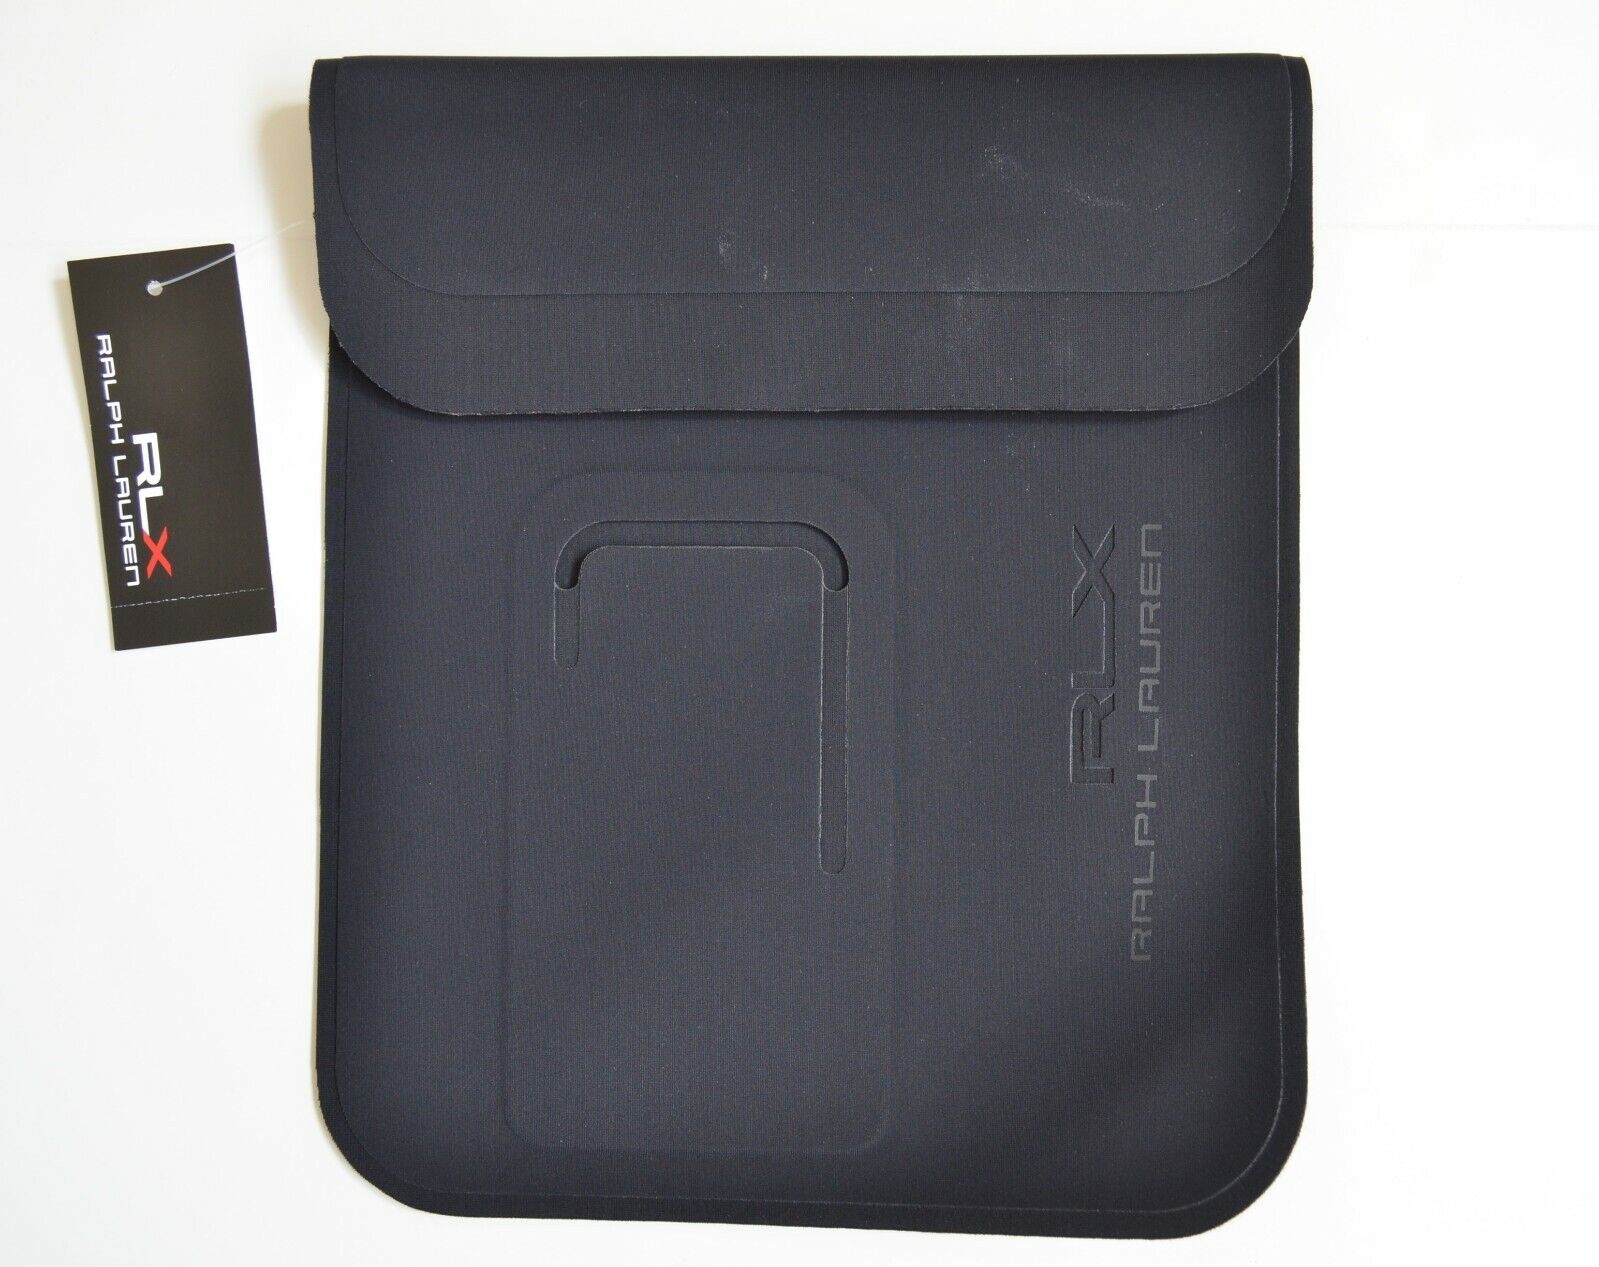 Polo Ralph Lauren RLX O-Range Tablet Ipad Cover Soft Sleeve Made in Italy $125